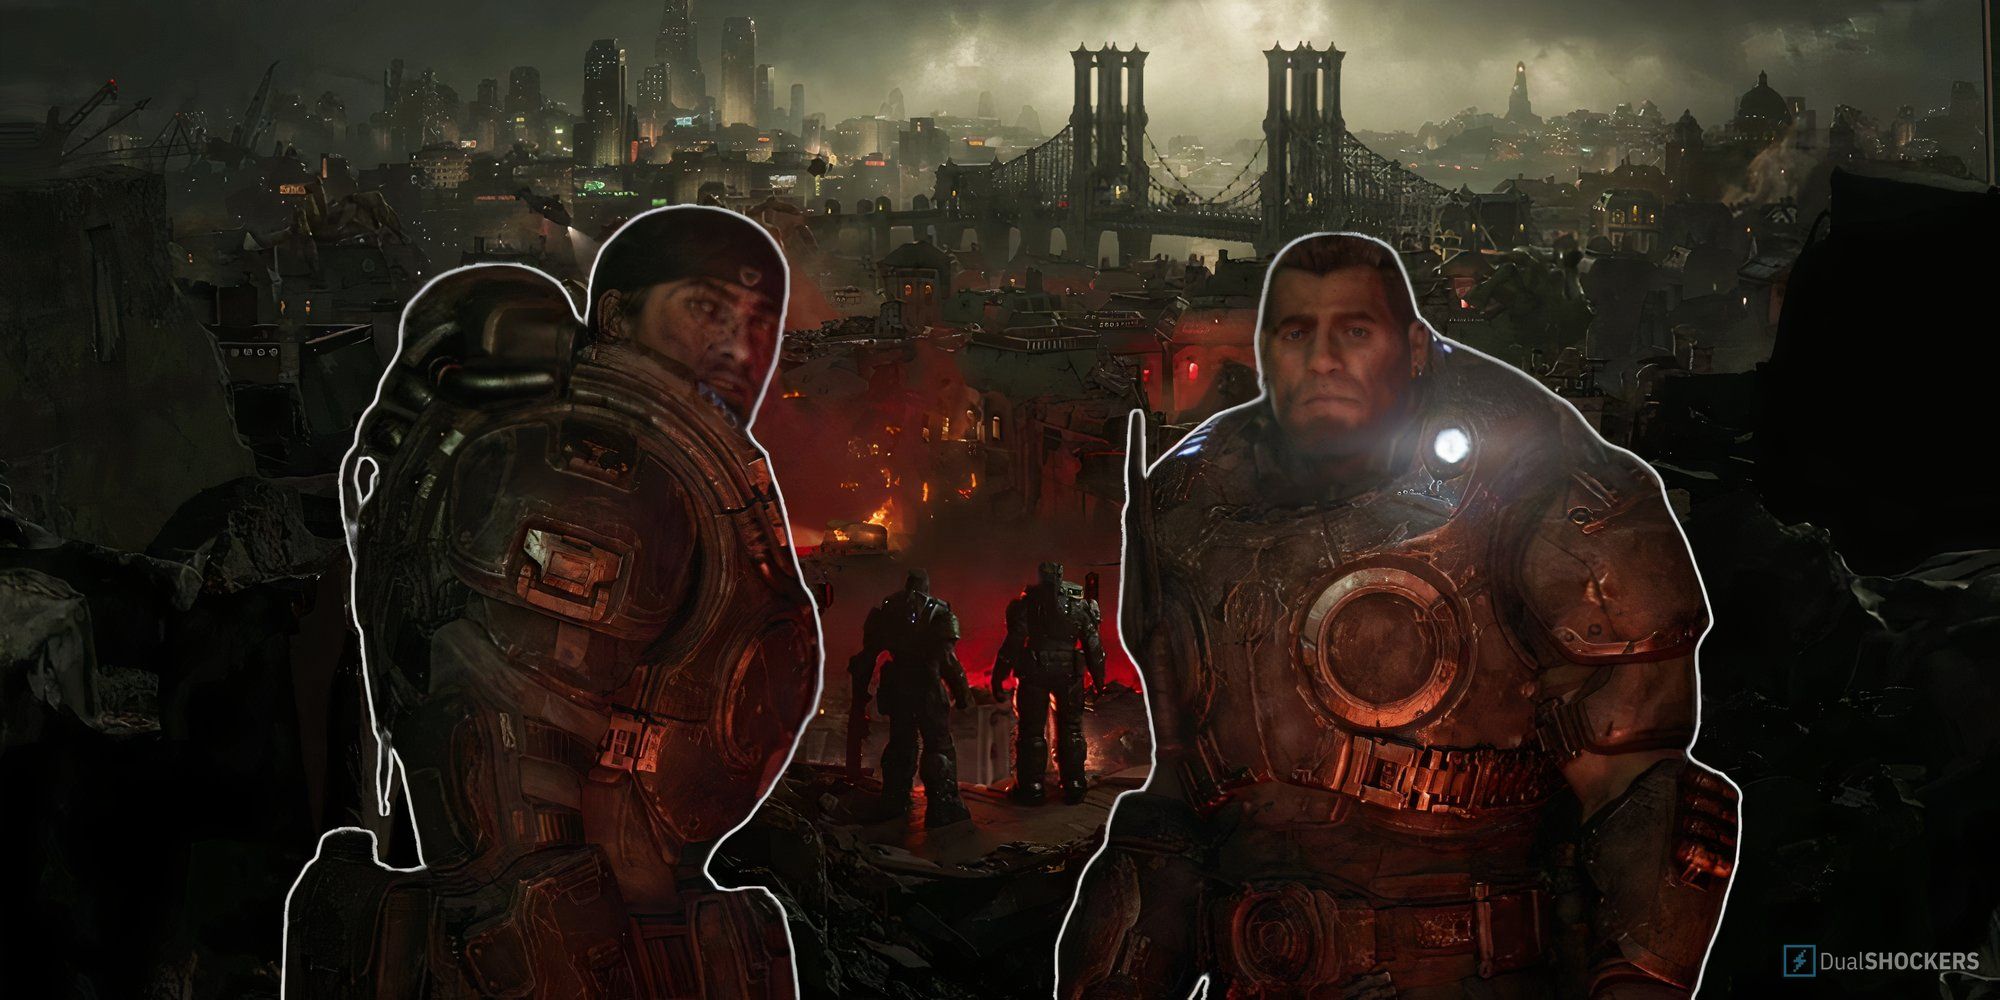 Still from the Gears of War: E-Day trailer of Marcus & Dom looking over the city's locus invasion with two images of the characters side by side.